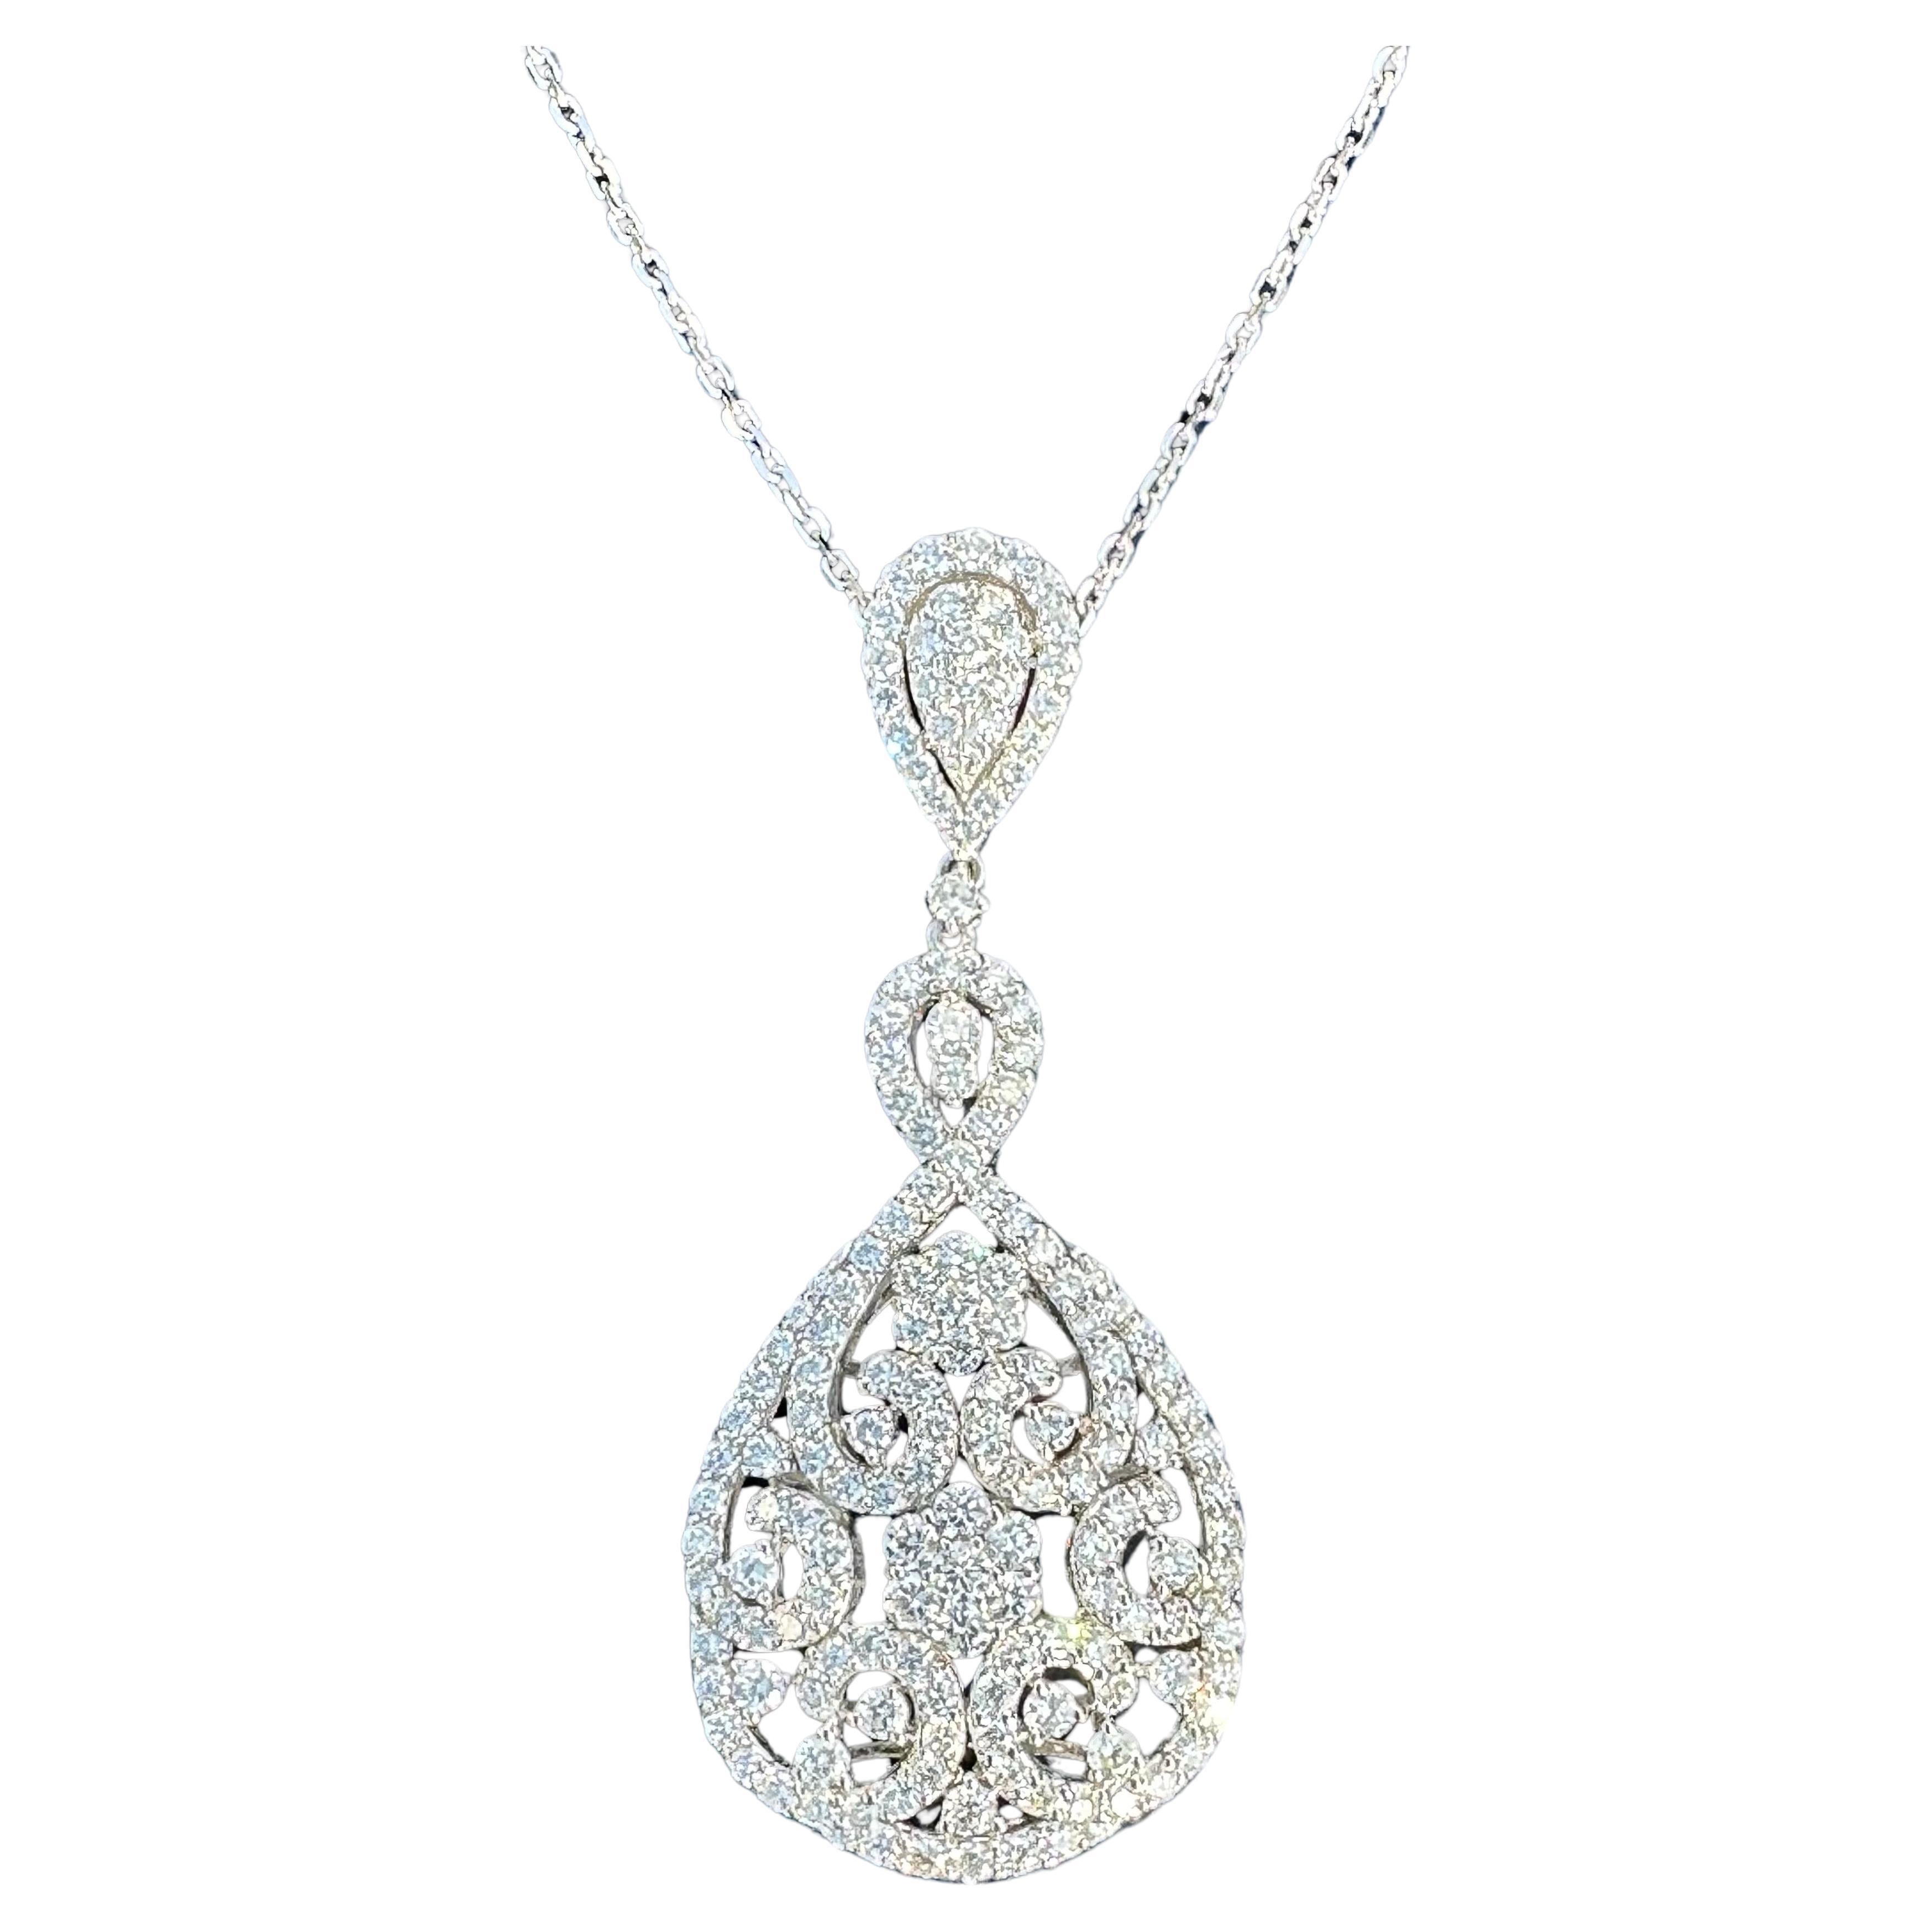 Magnificent 8.5 Carat Diamond 18K White Gold Pear Shaped Drop Pendant on Chain